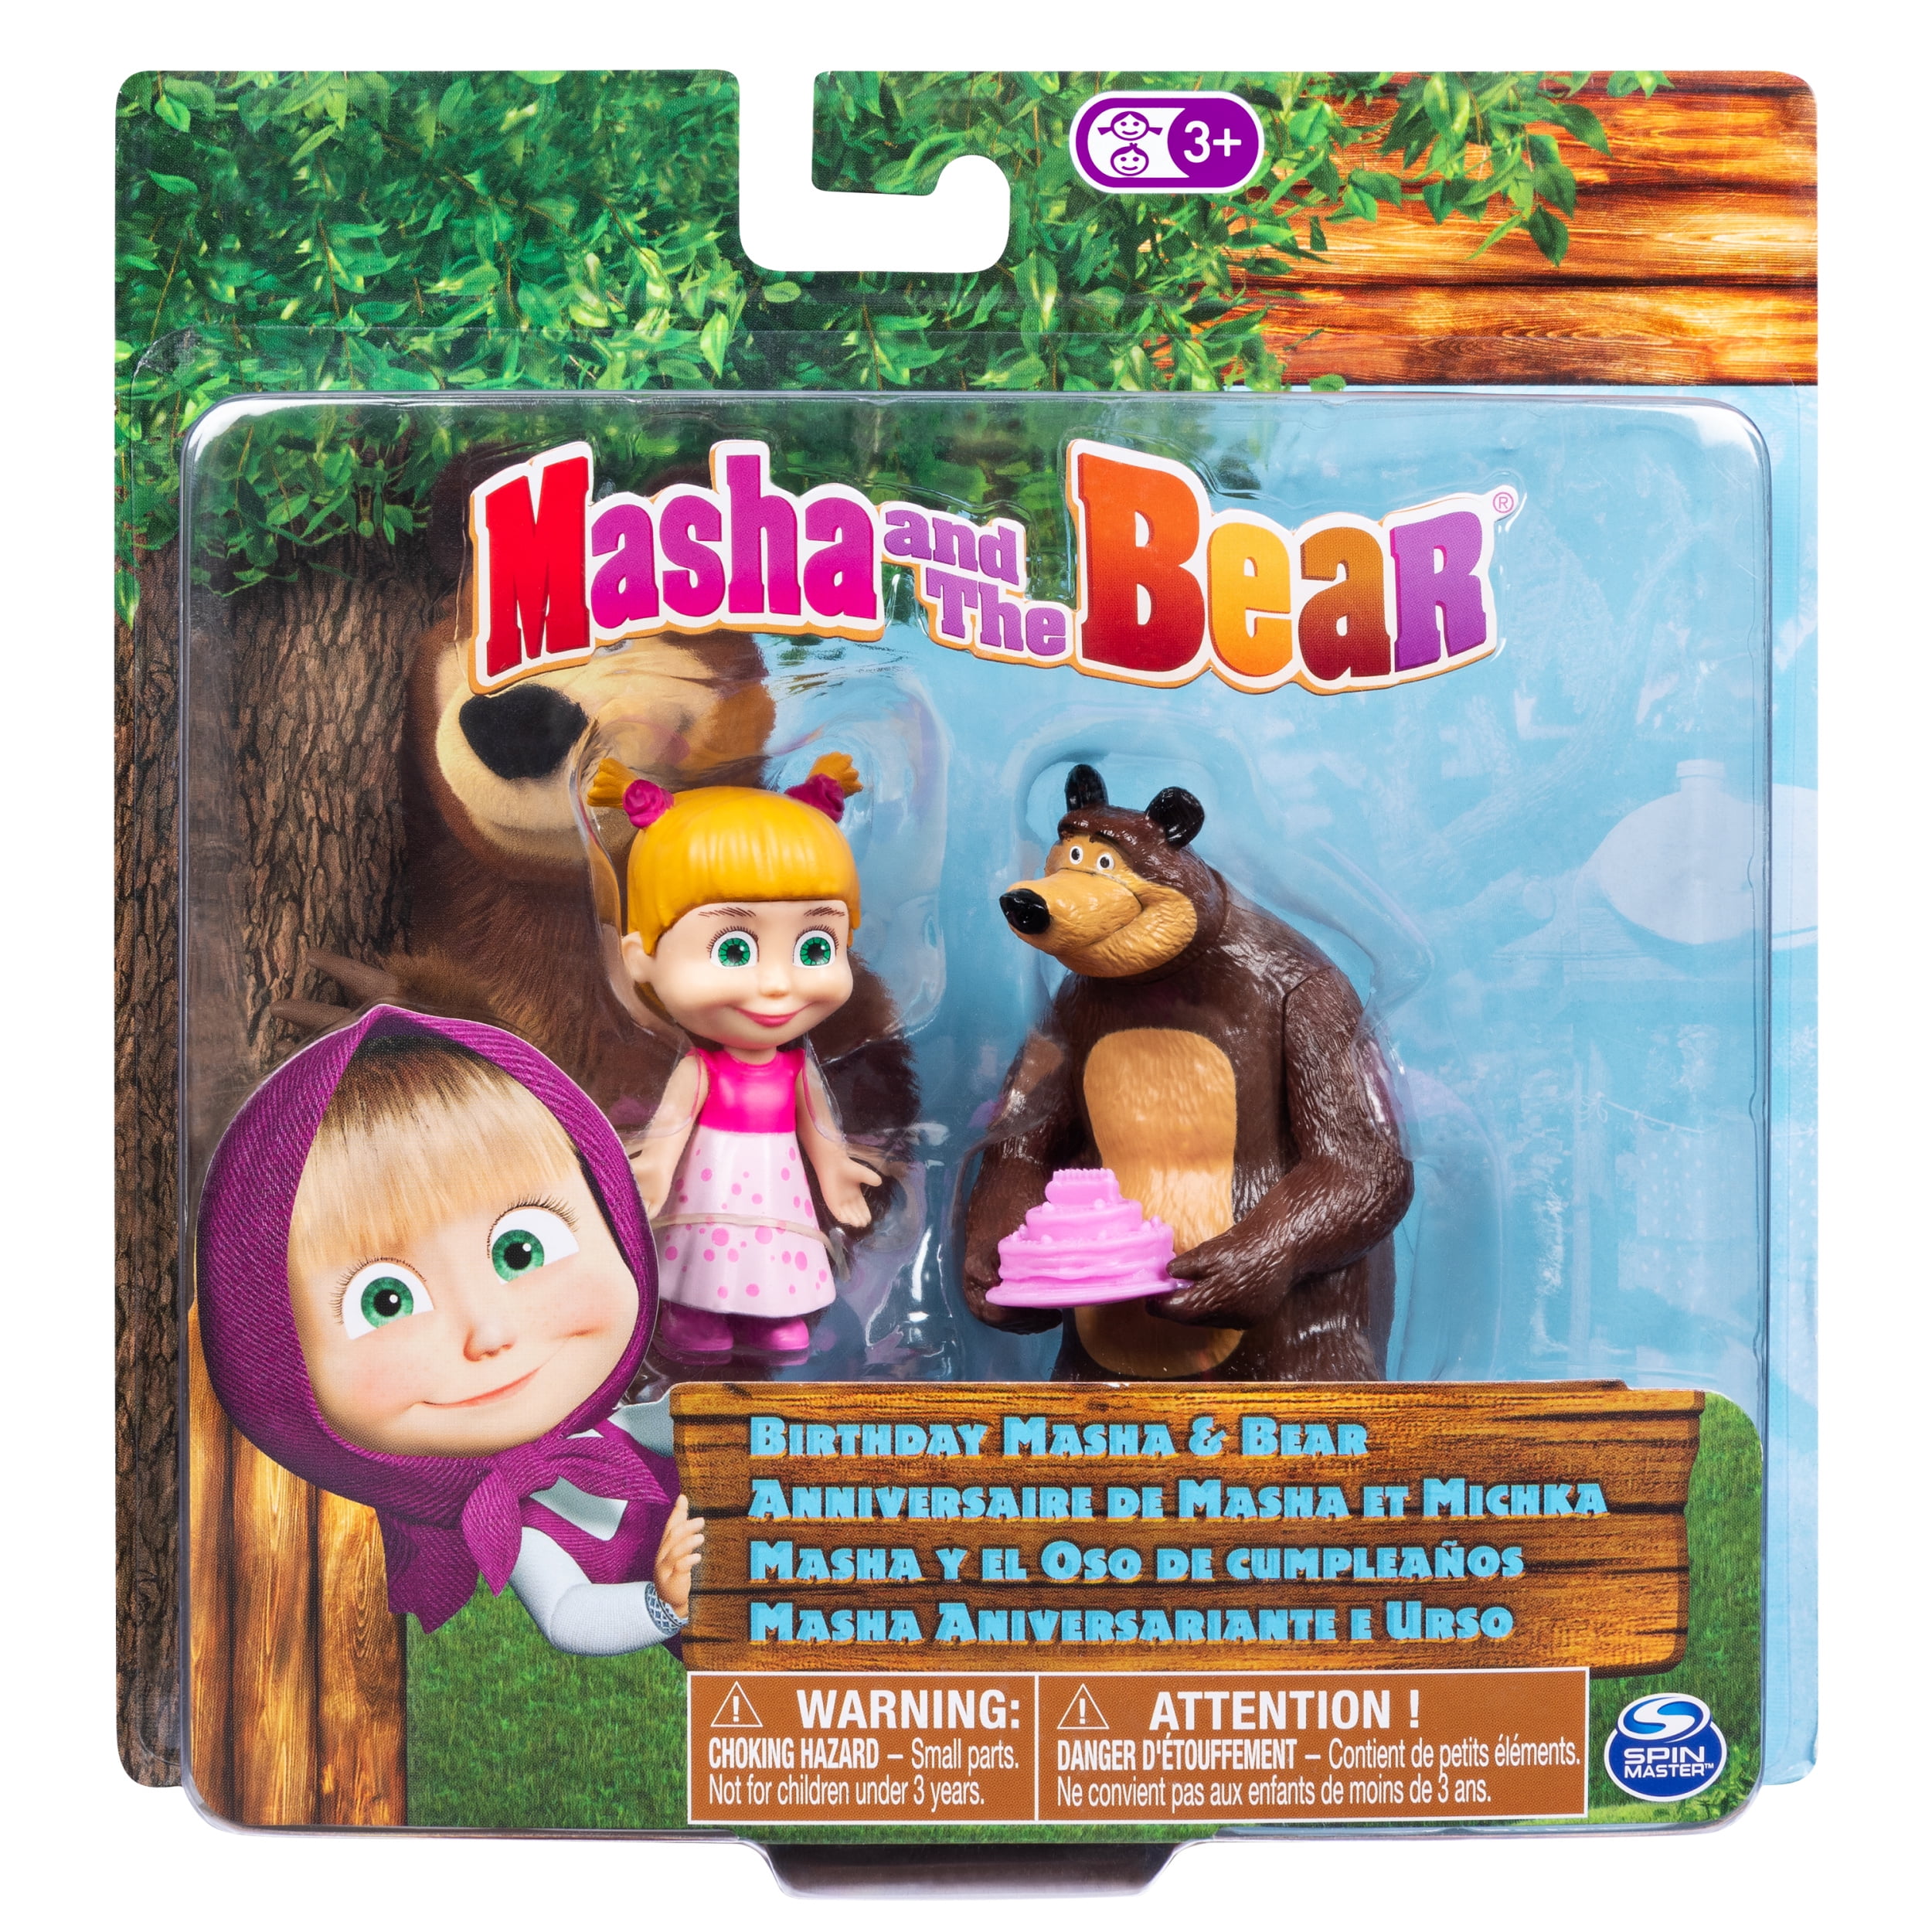 Masha And The Bear Birthday Masha And Bear Collectible Figures For Ages 3 And Up 